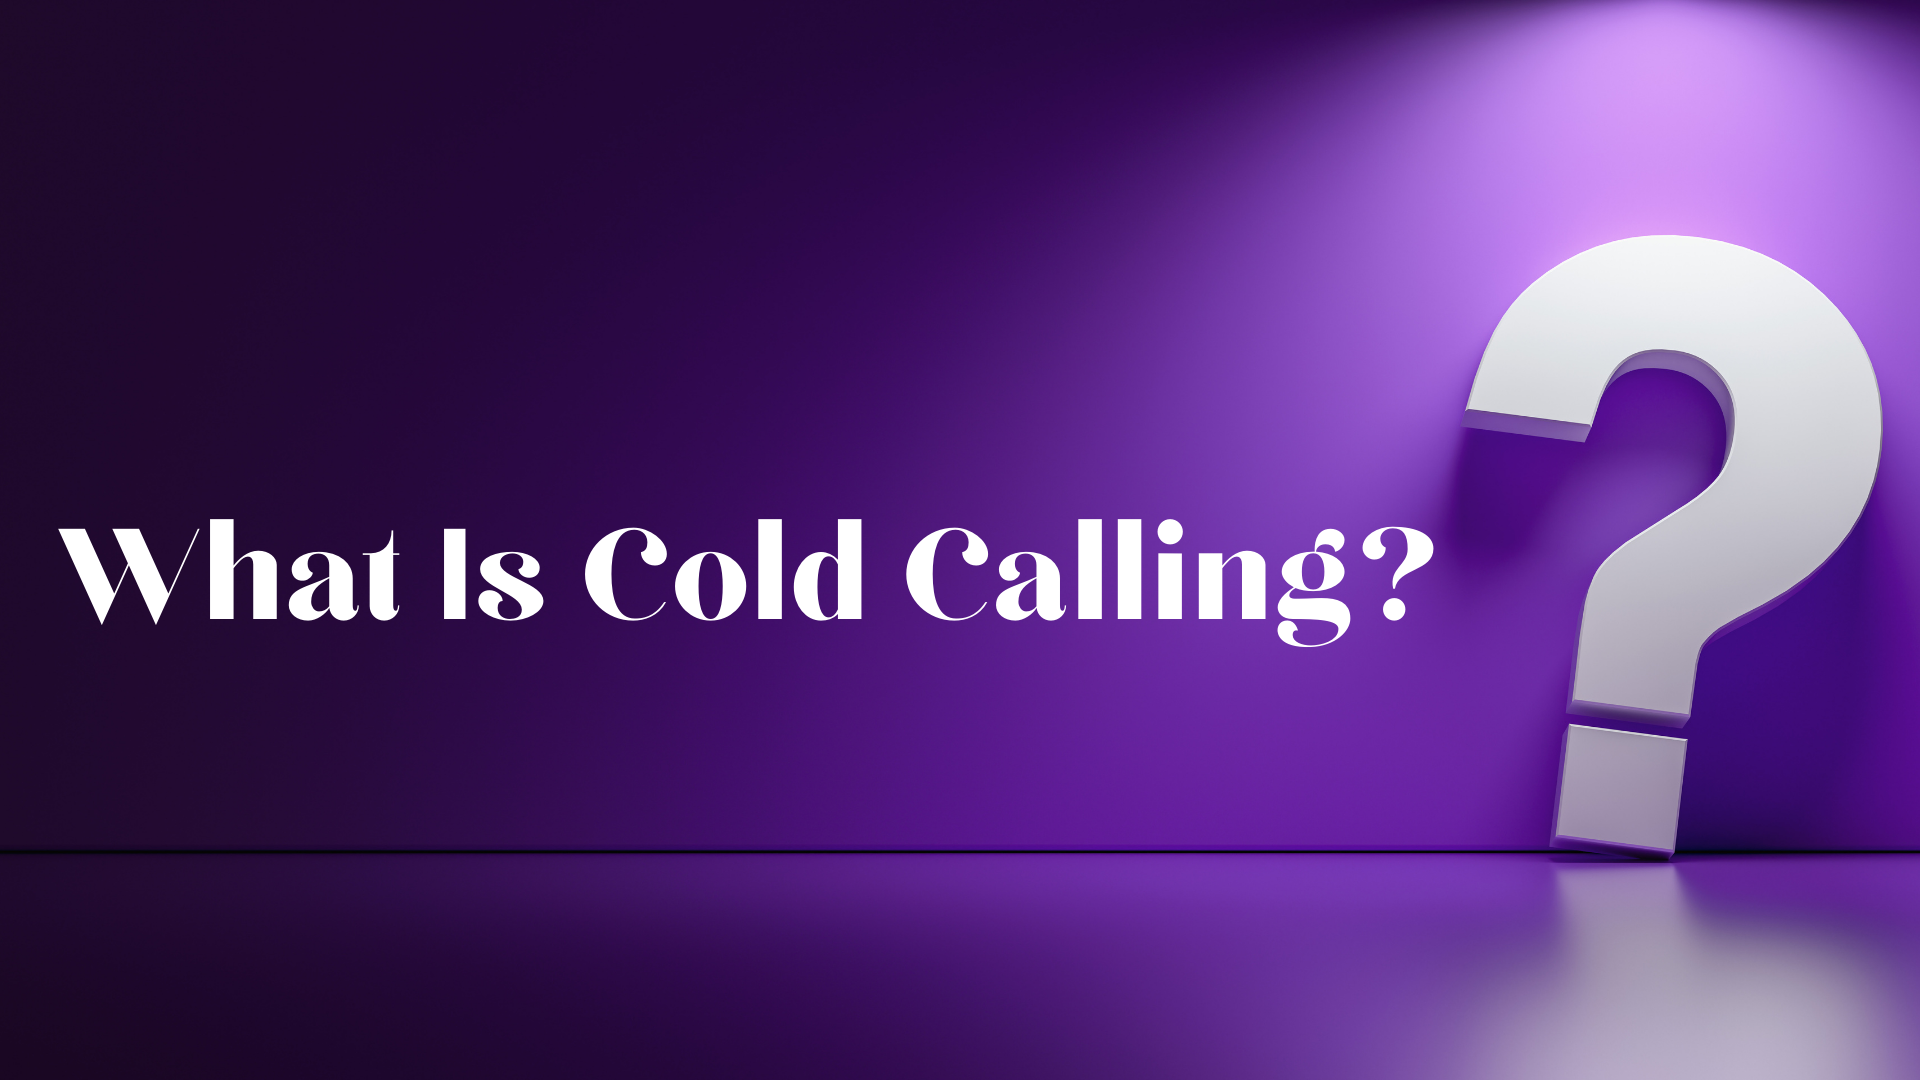 What Is Cold Calling?